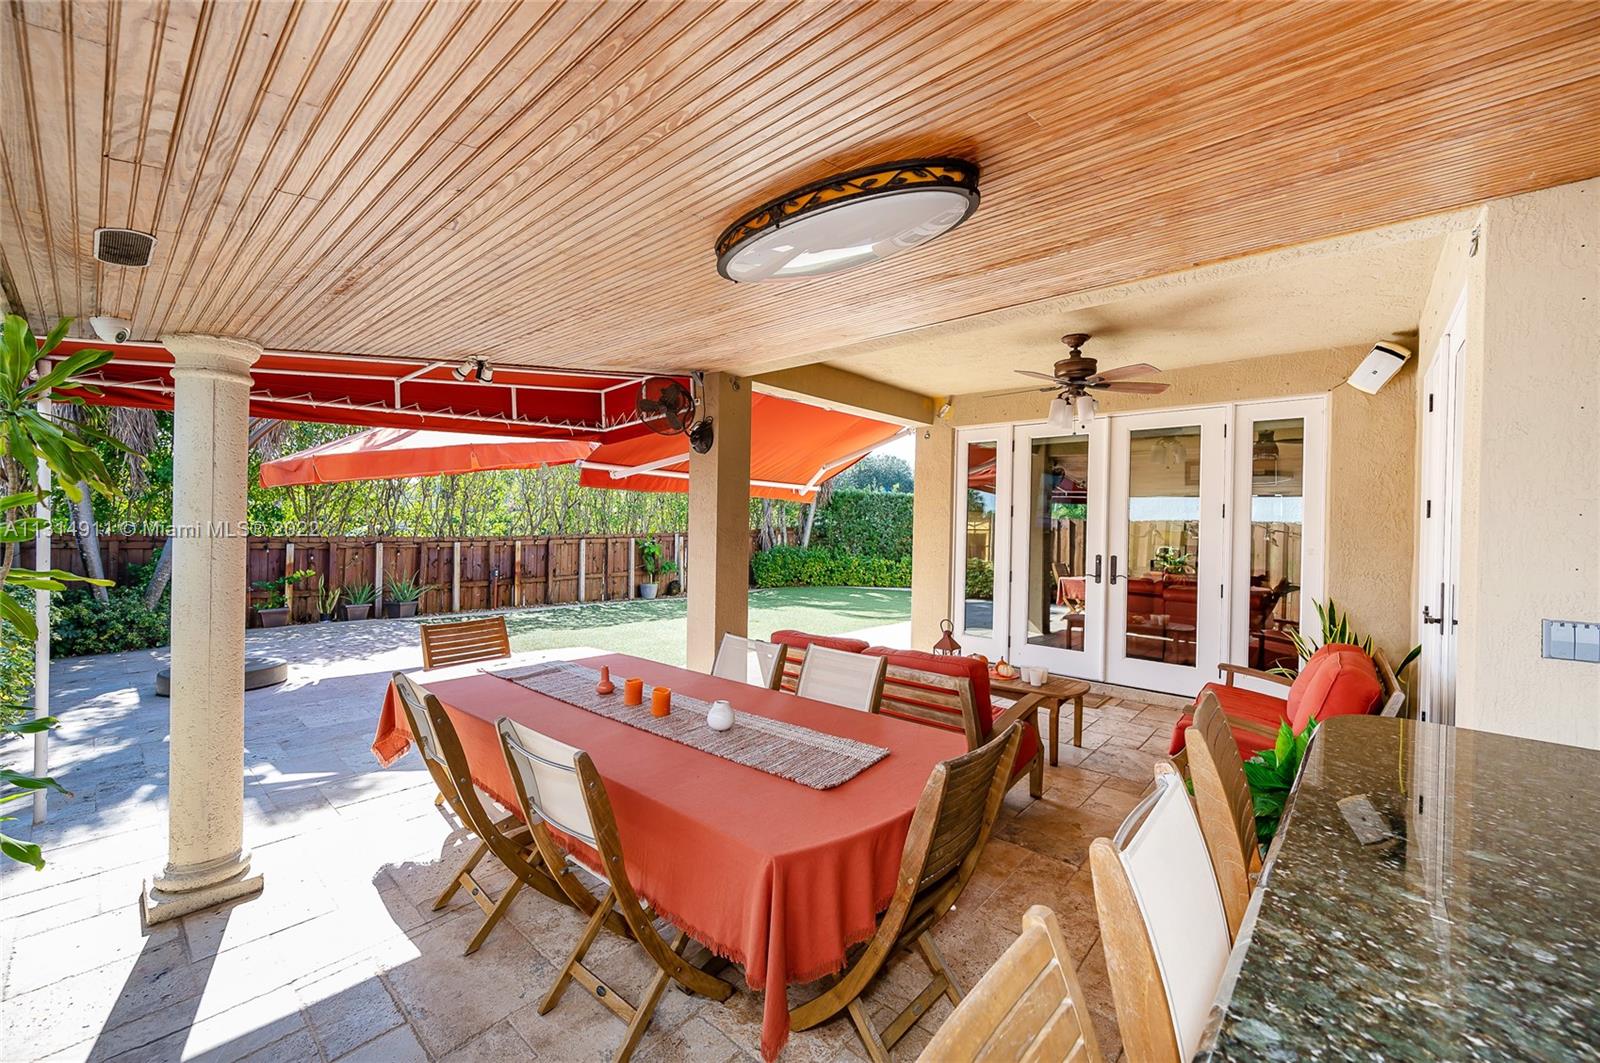 Very spacious entertaining area with patio, terrace,dining space, and summer kitchen